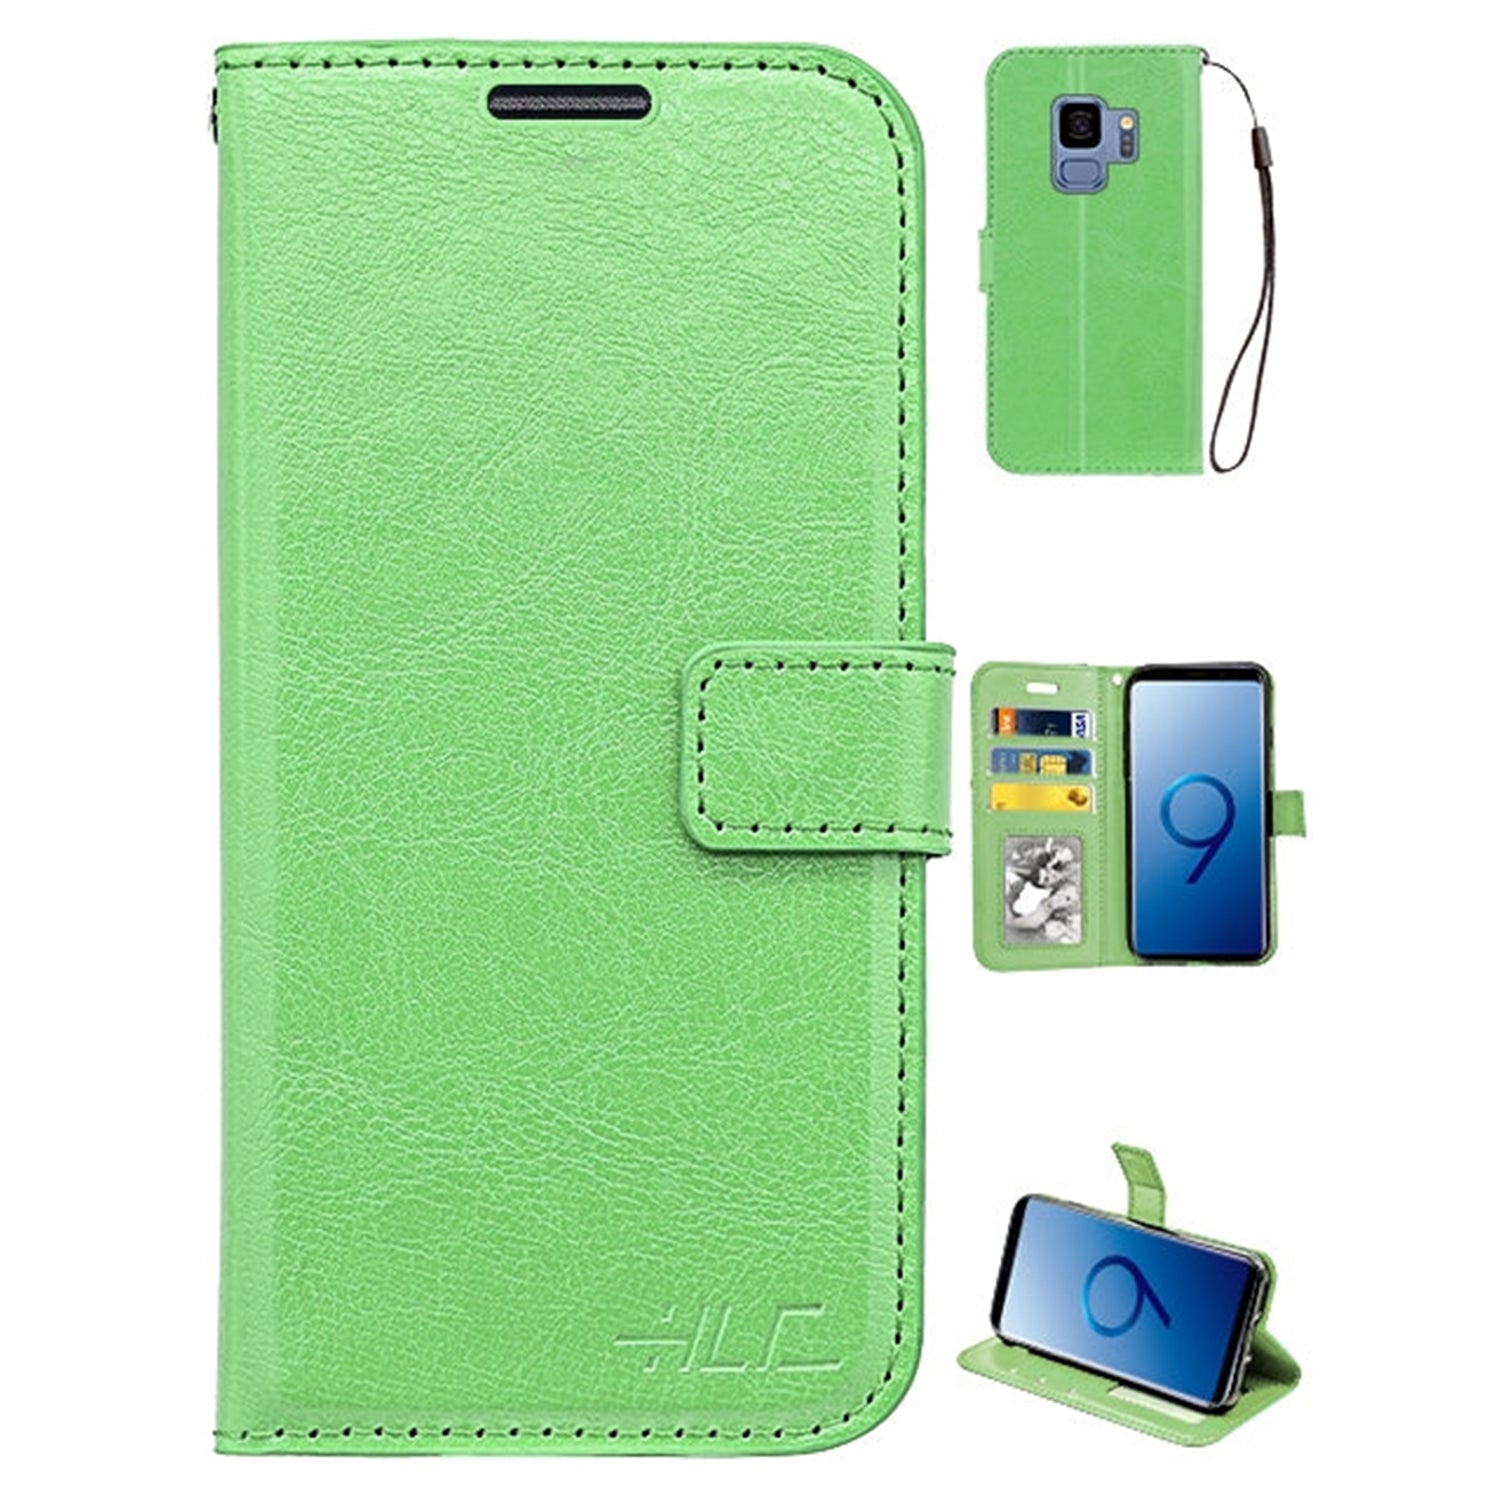 S9 Real Plain Leather Wallet Case